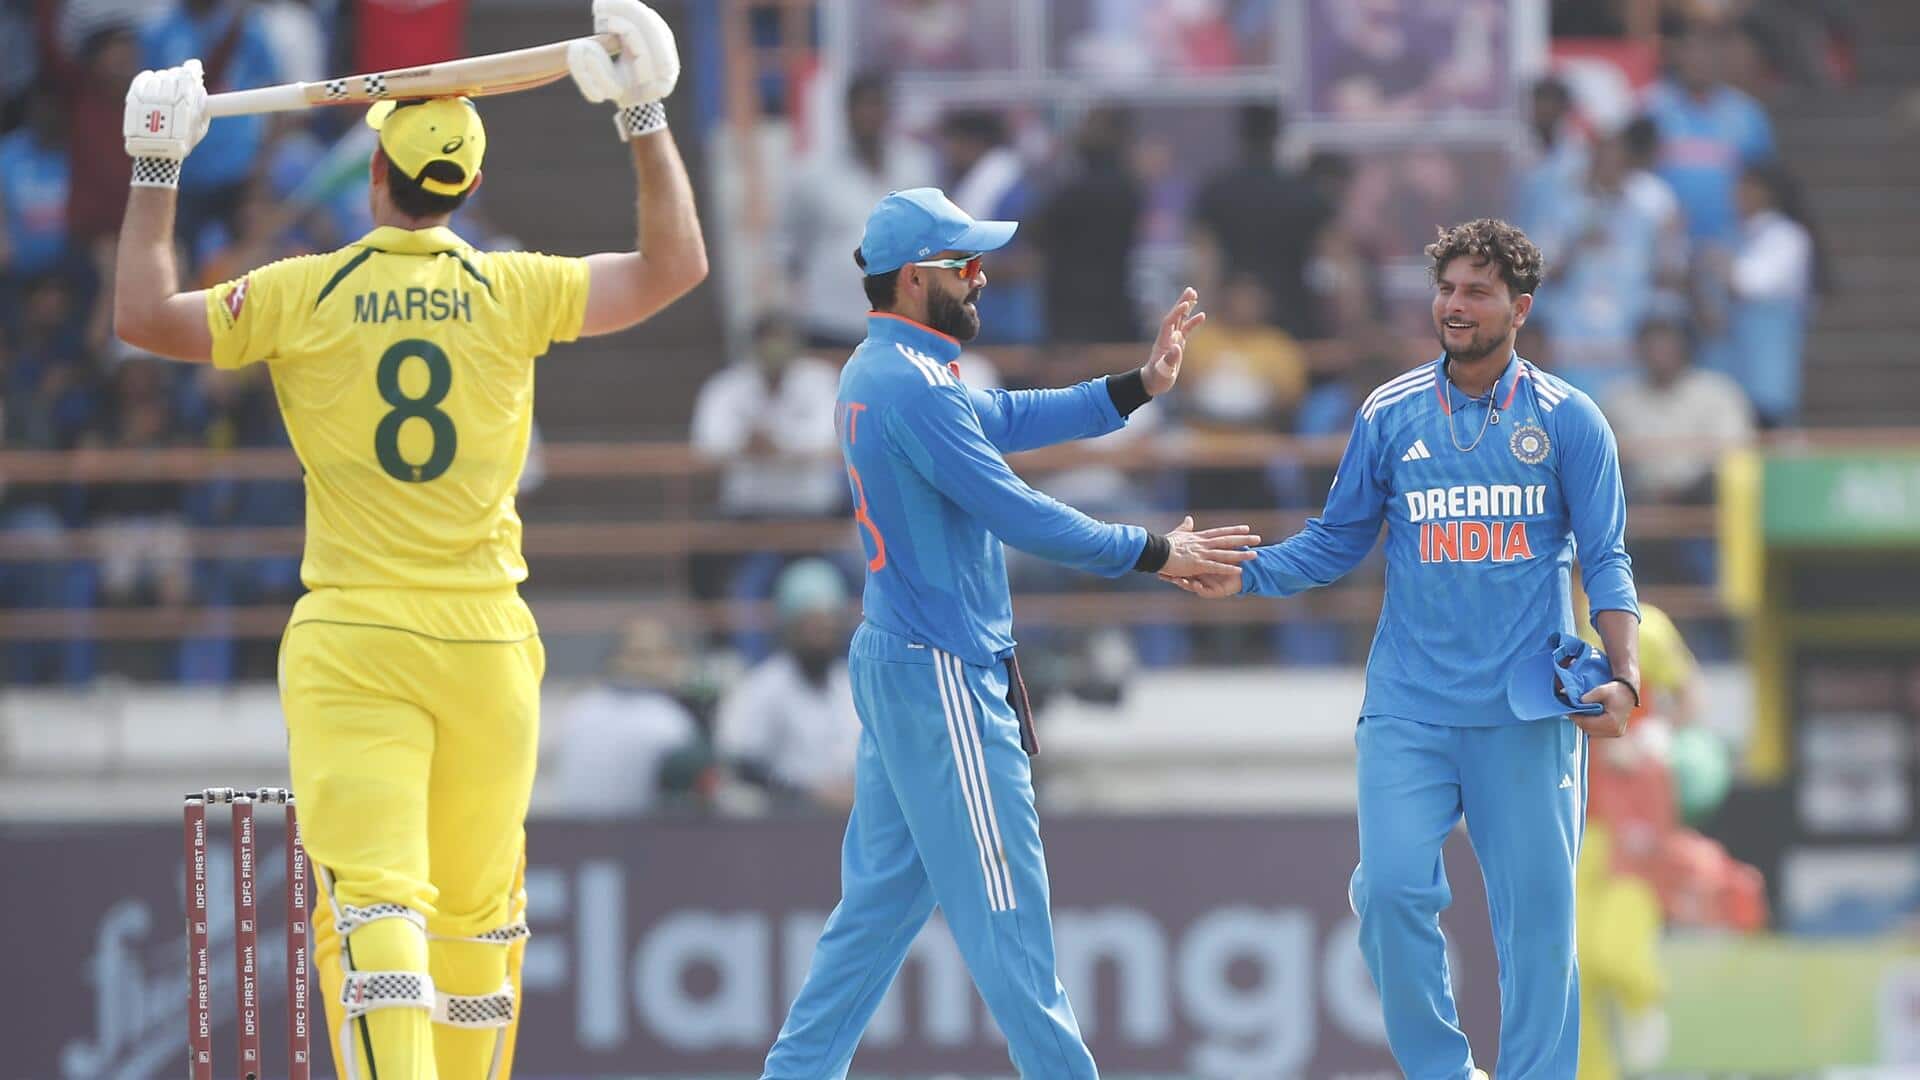 3rd ODI: Top-four batters guide Australia to 352/7 against India